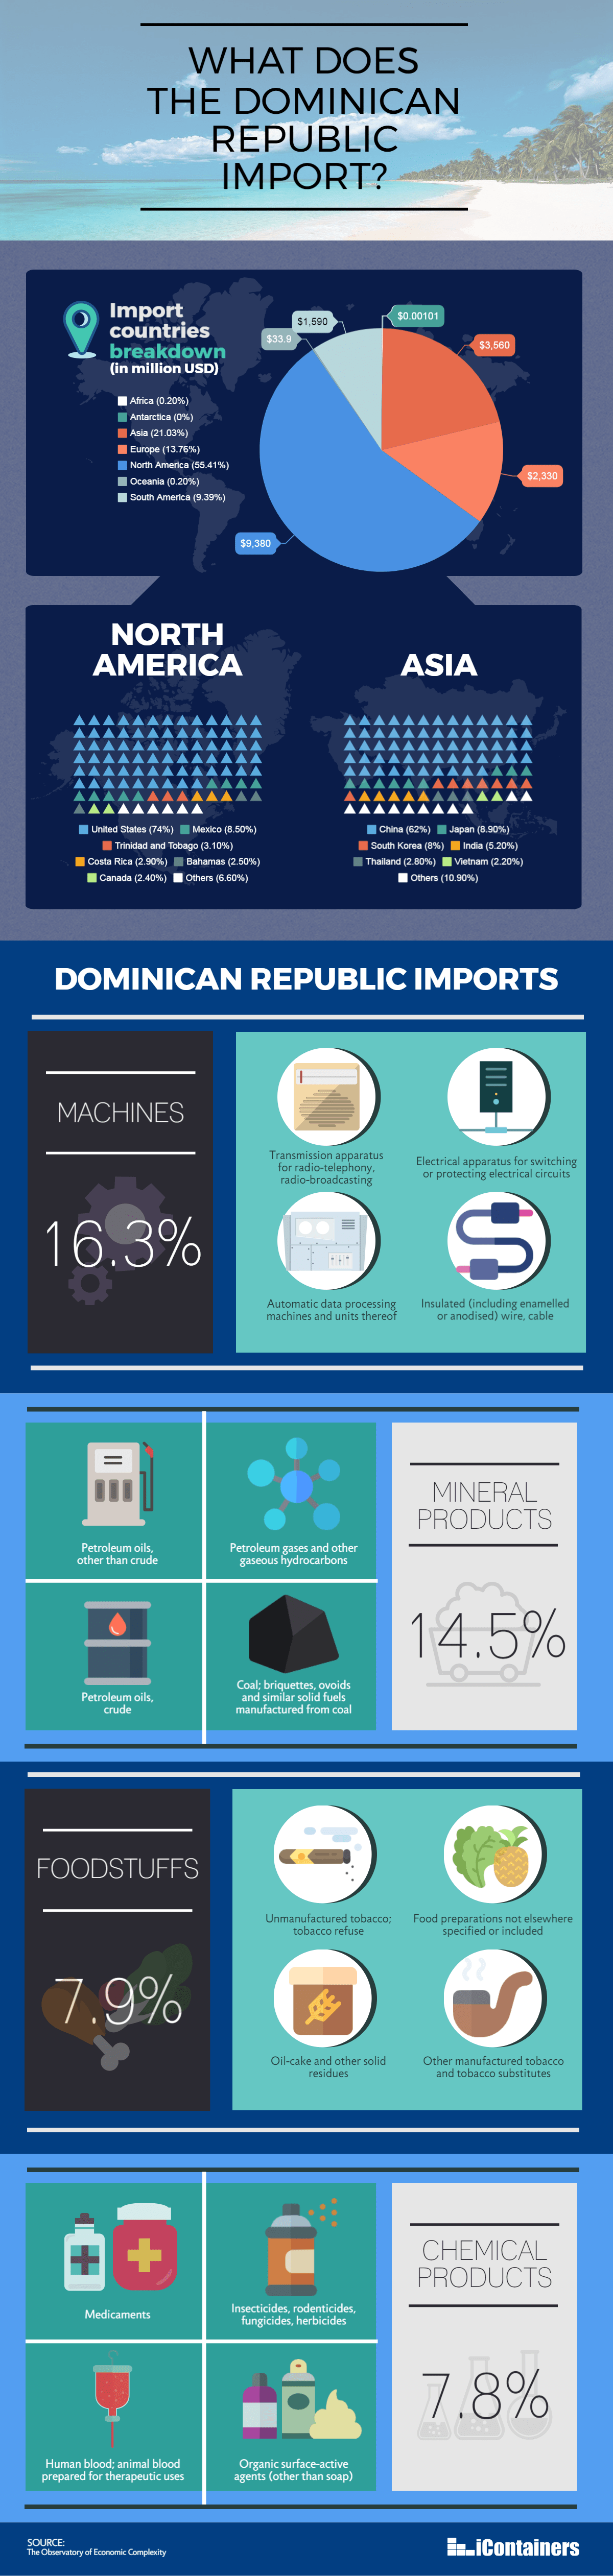 what does the dominican republic import infographic image